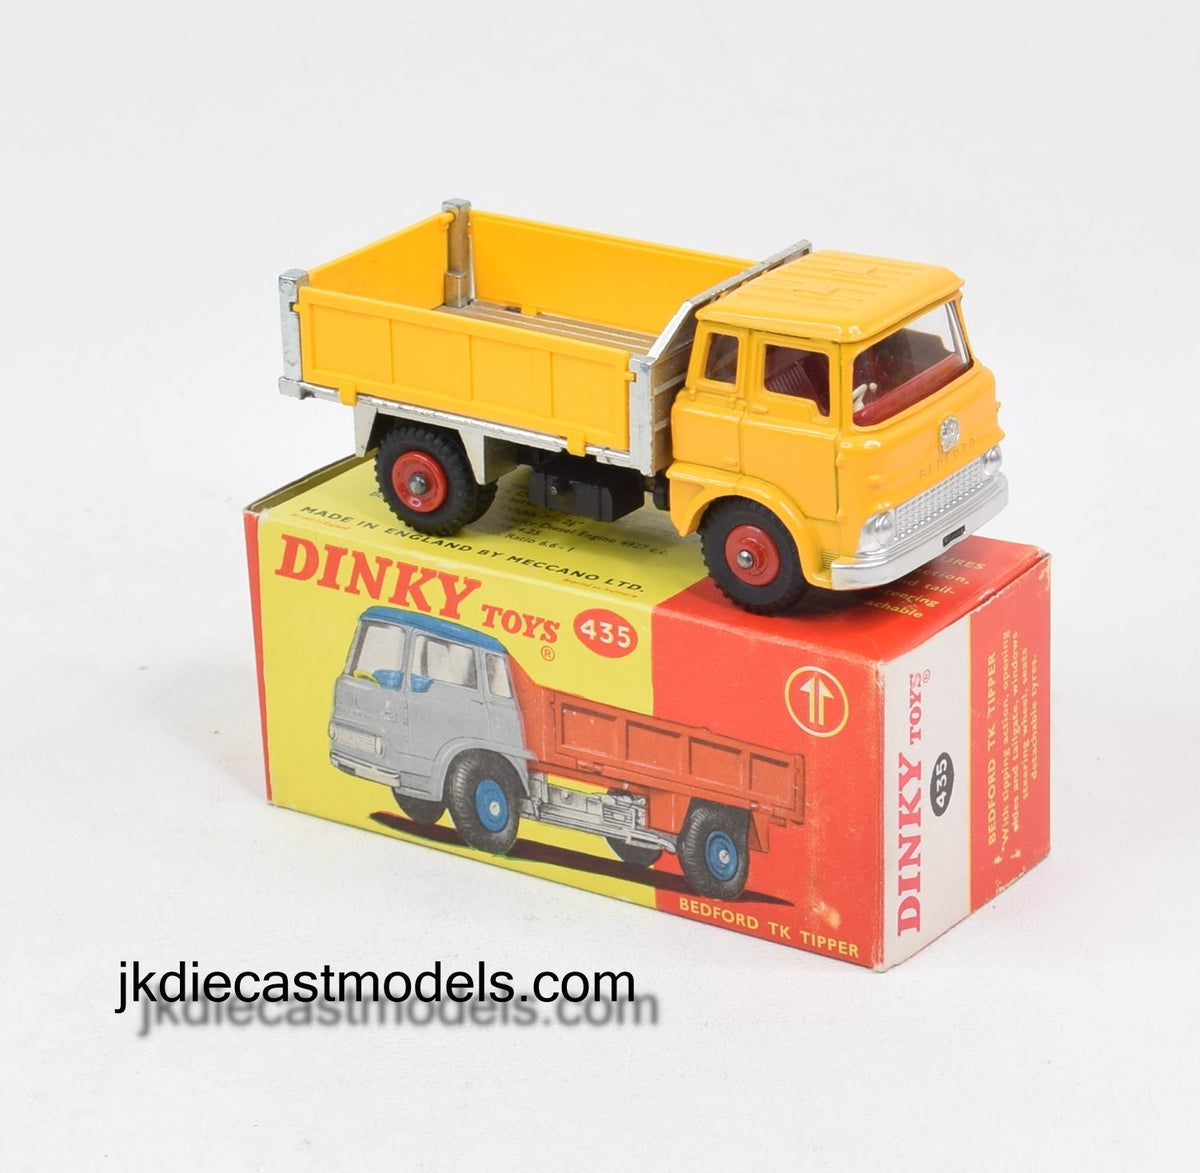 Dinky toy 435 Bedford TK Tipper Virtually Mint/Boxed 'BGS Collection'